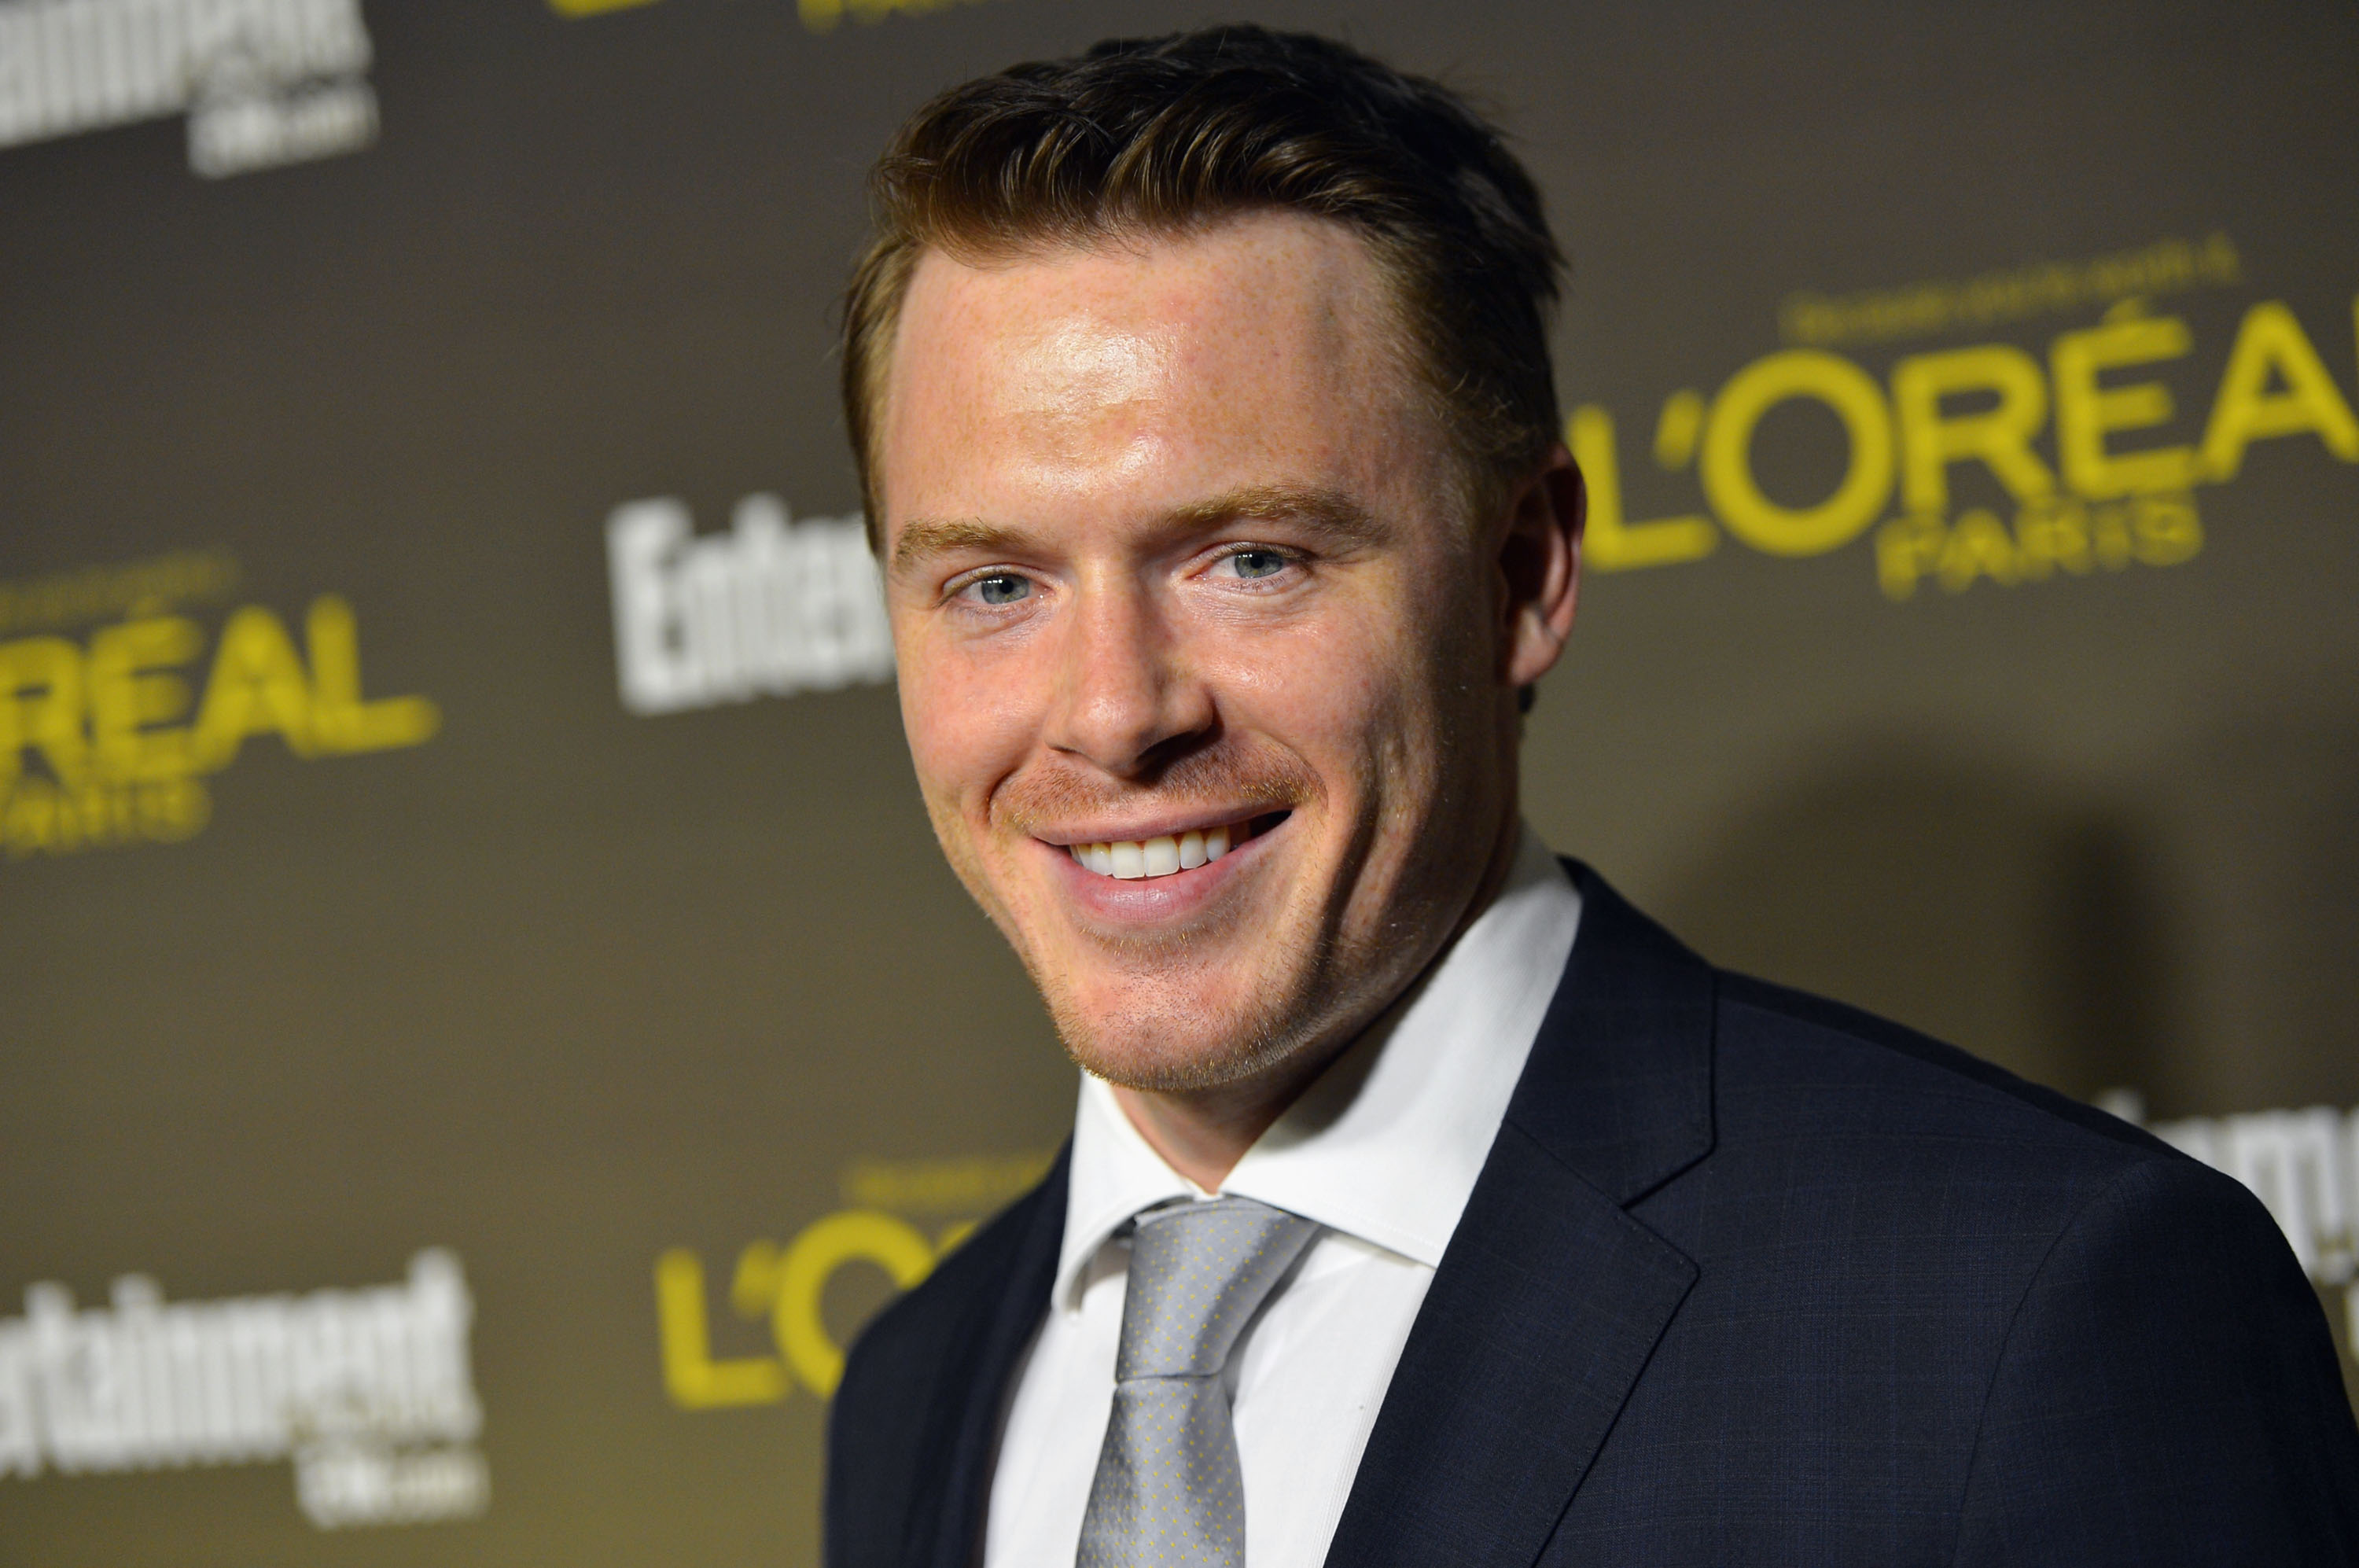 Diego Klattenhoff attends The 2012 Entertainment Weekly Pre-Emmy Party Presented By L'Oreal Paris at Fig & Olive Melrose Place on September 21, 2012, in West Hollywood, California. | Source: Getty Images